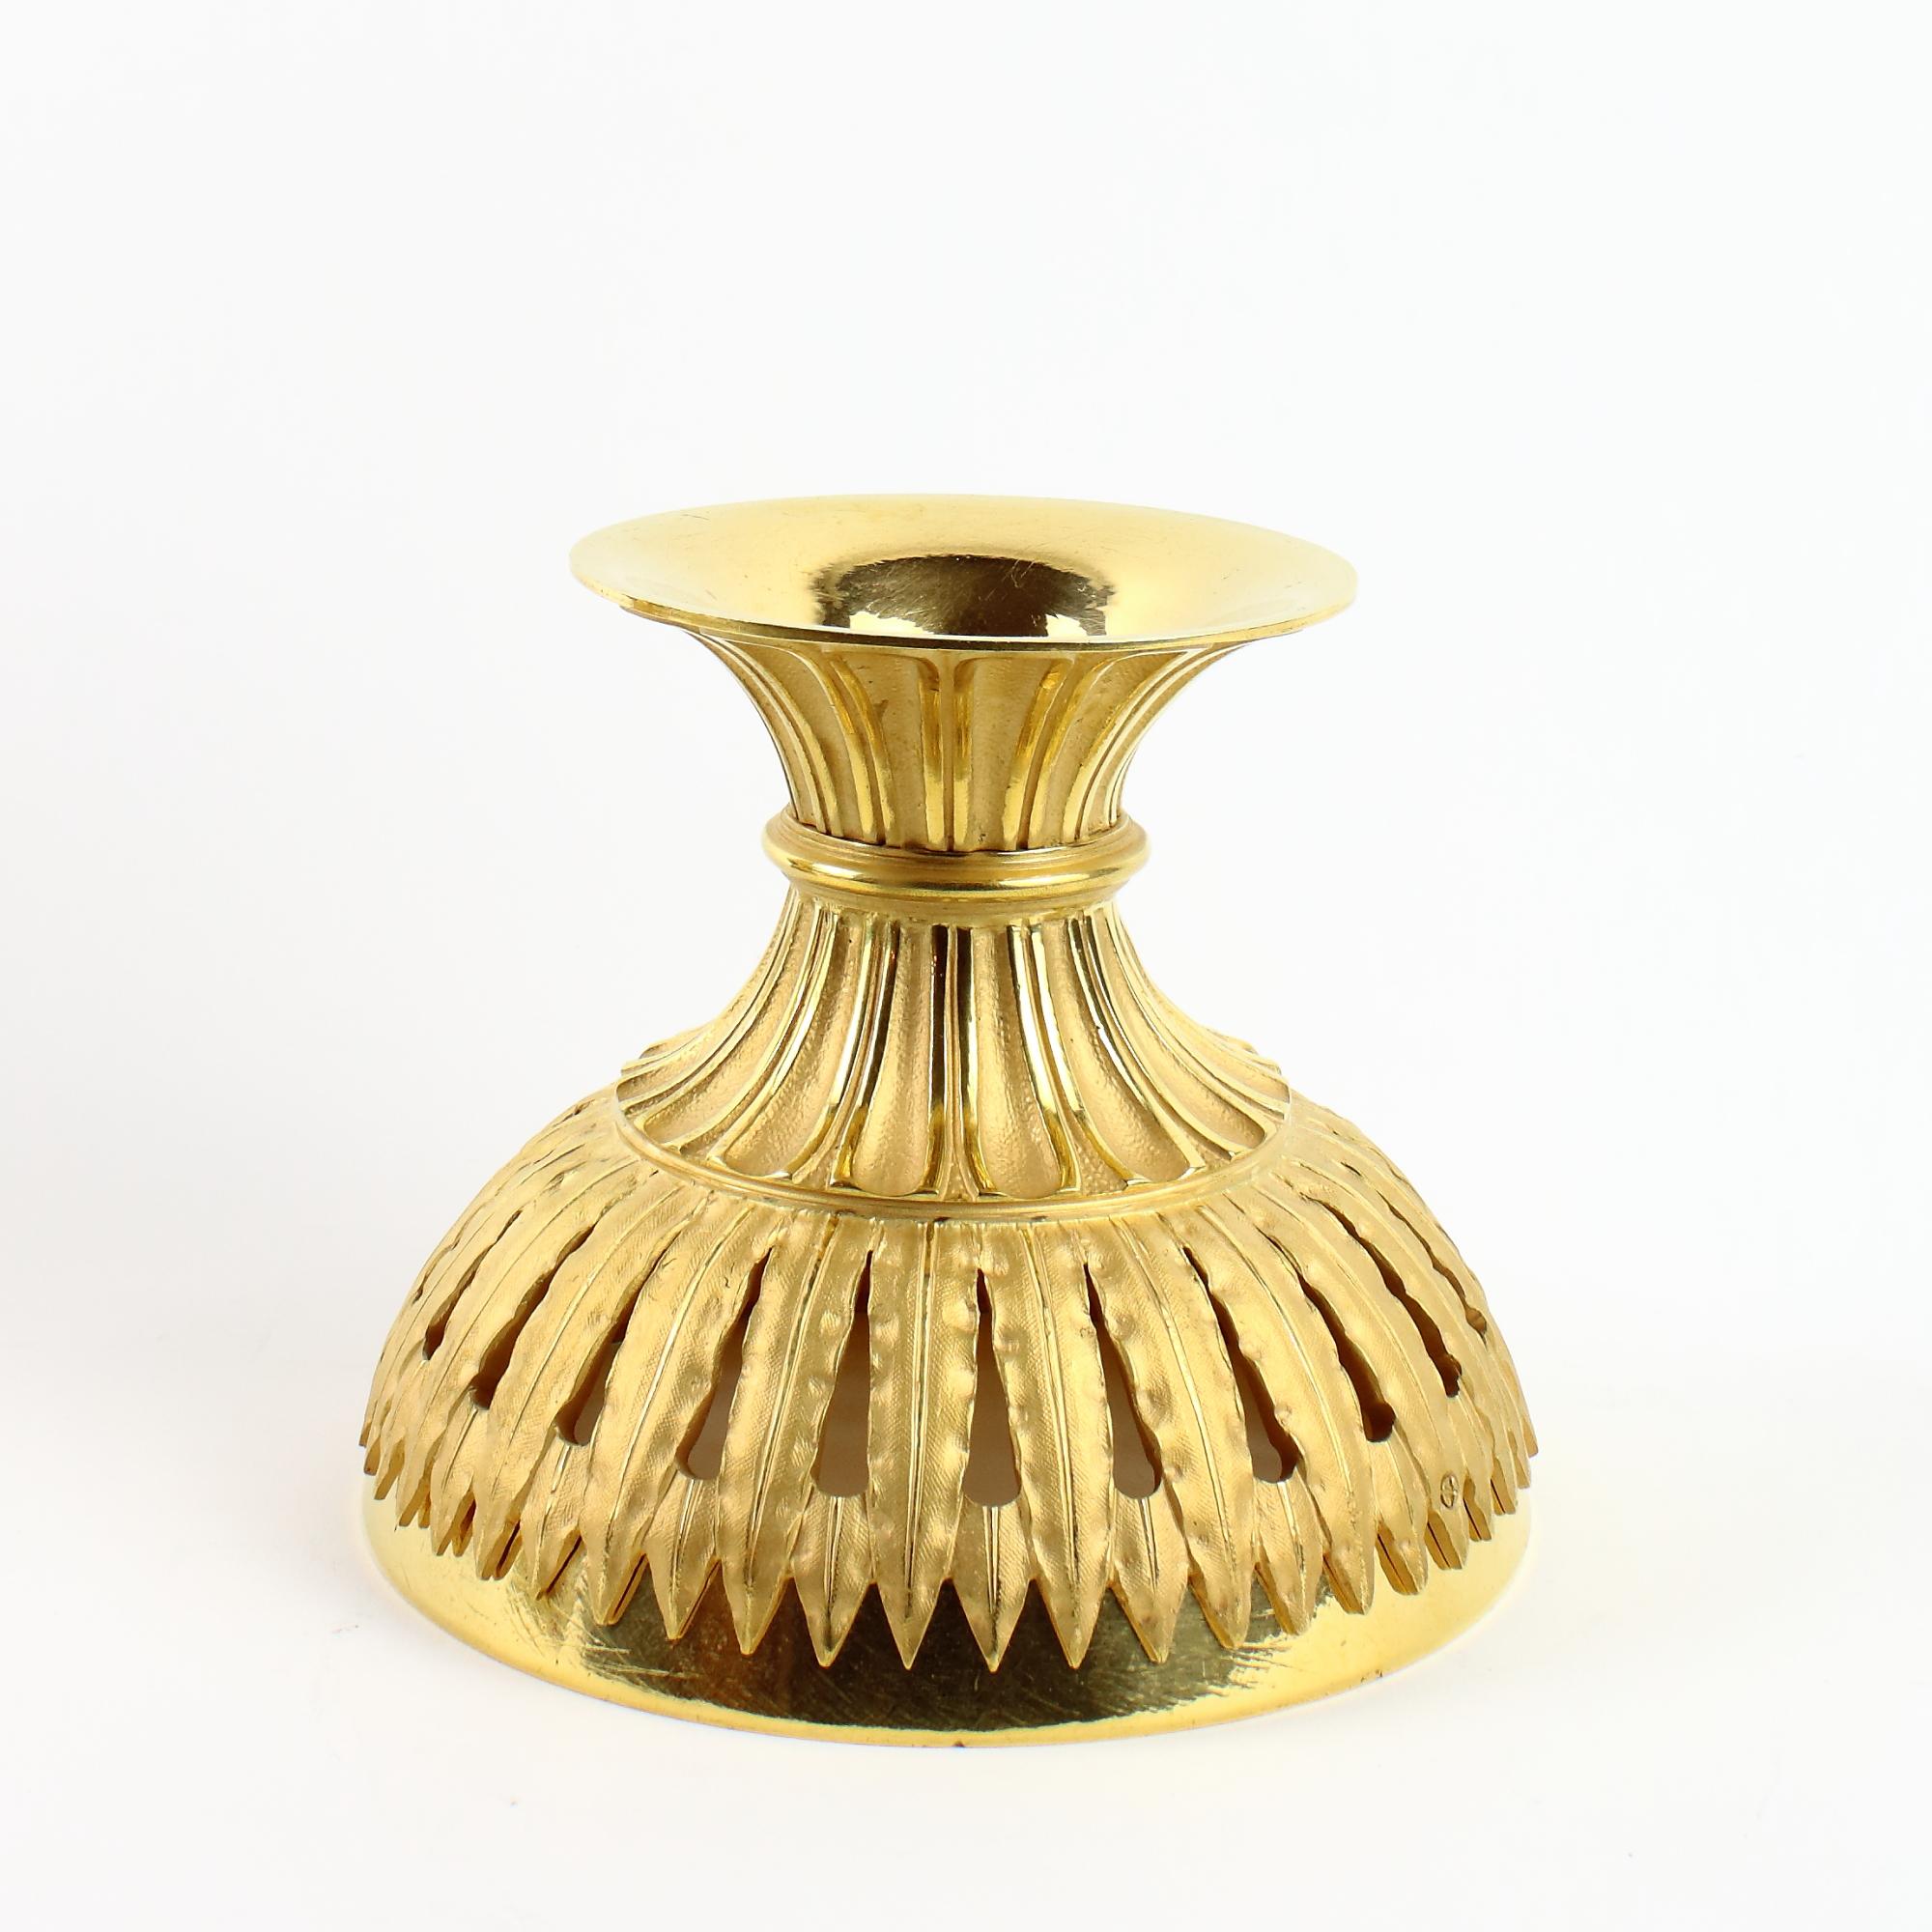 French Late 18thh Century Louis XVI Gilt Bronze Incense Burner or Brule Parfum For Sale 9